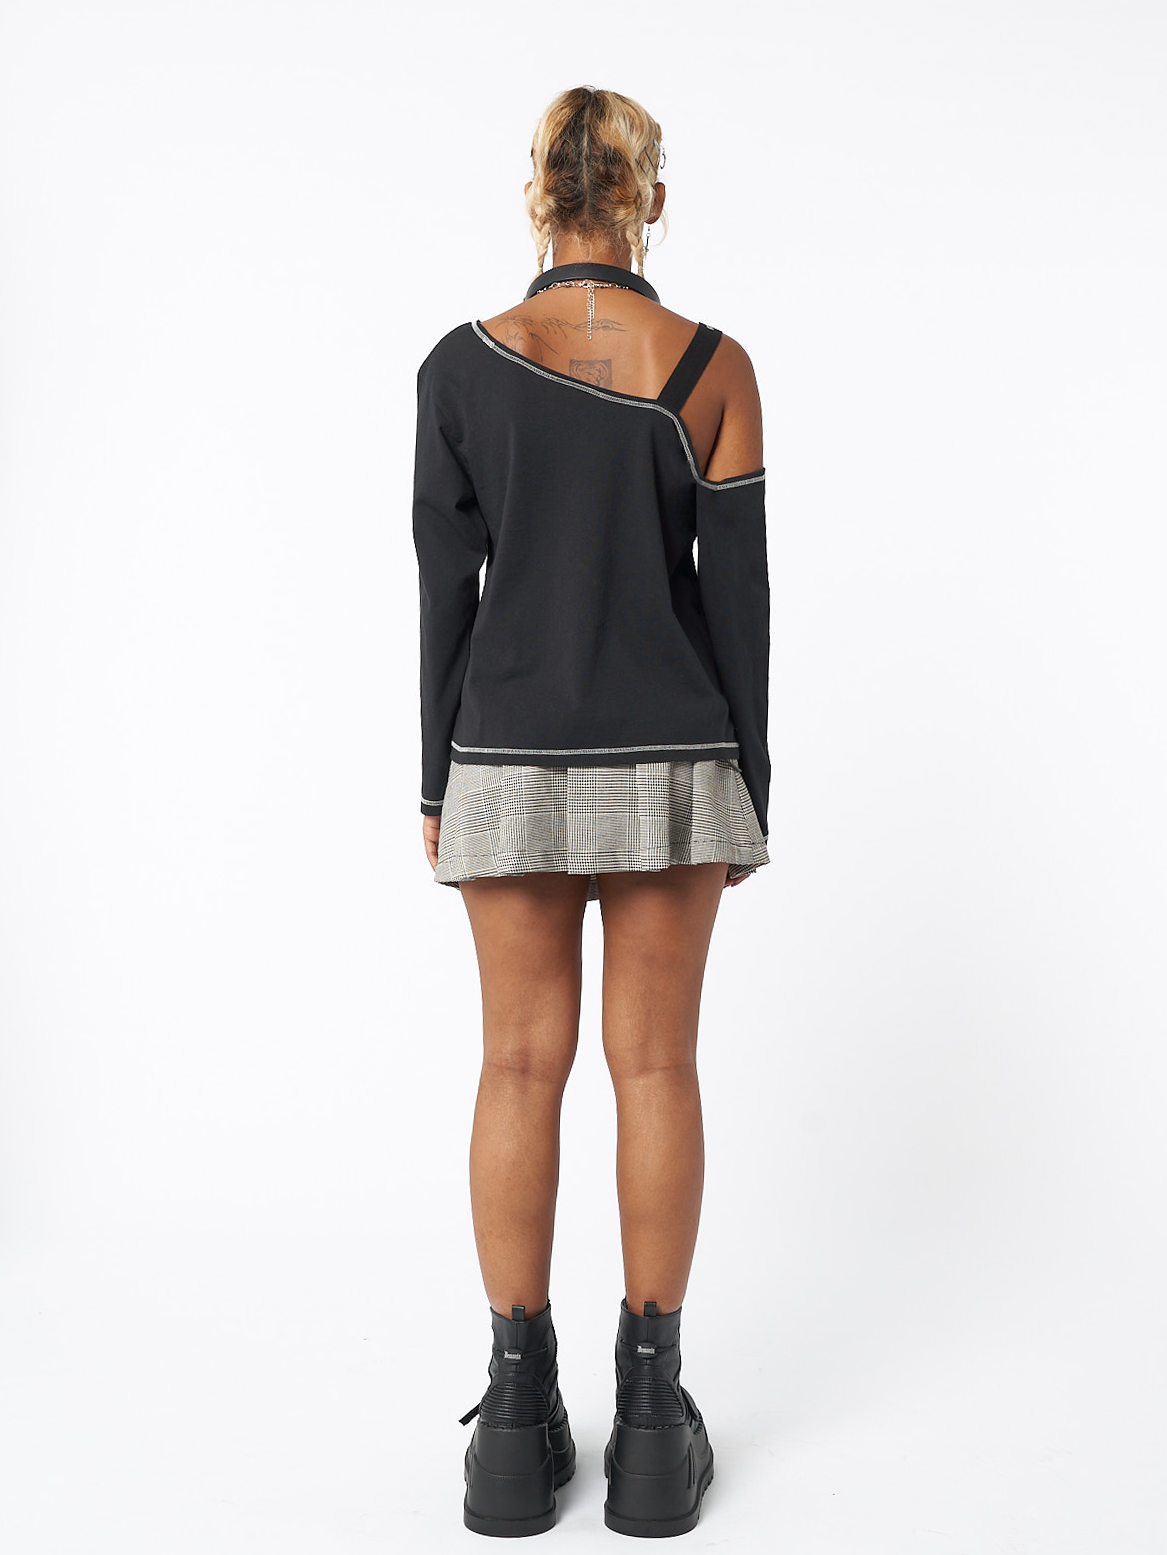 Asymmetric top in black featuring cut out shoulder with buckle grommet eyelet strap and Shocky girl graphic front print